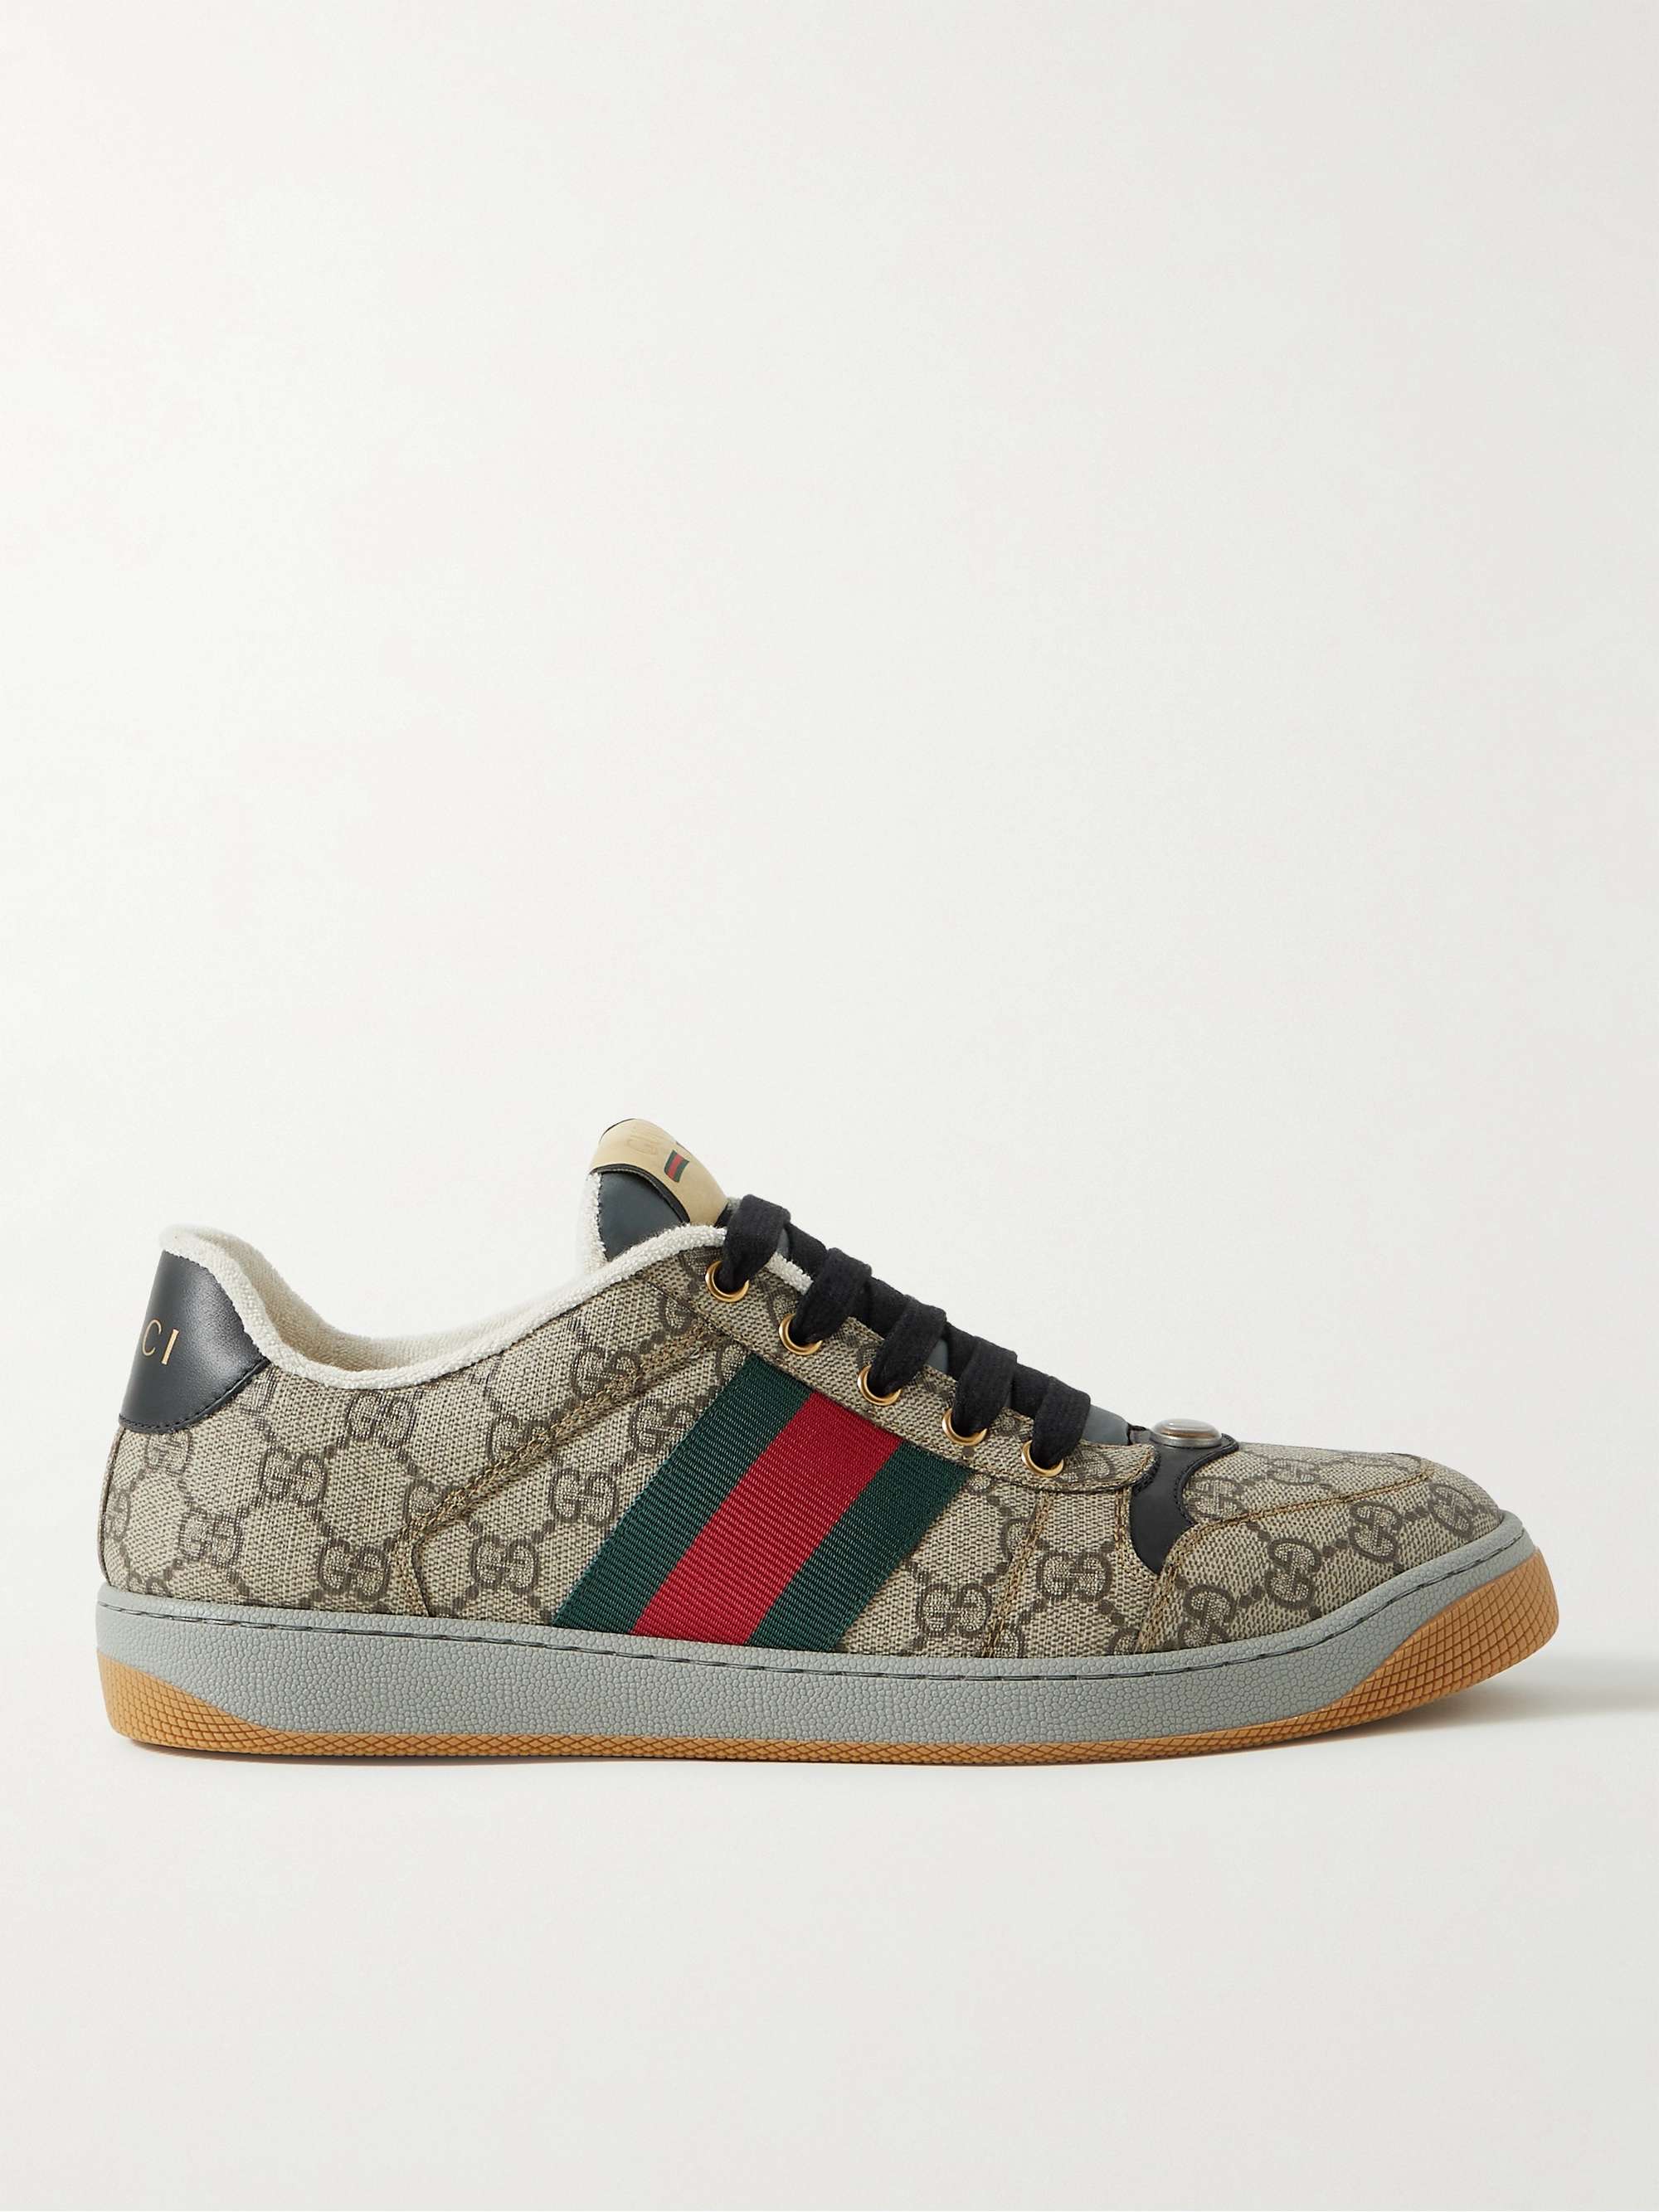 Gucci Gg Monogram Canvas Shoes in Blue for Men